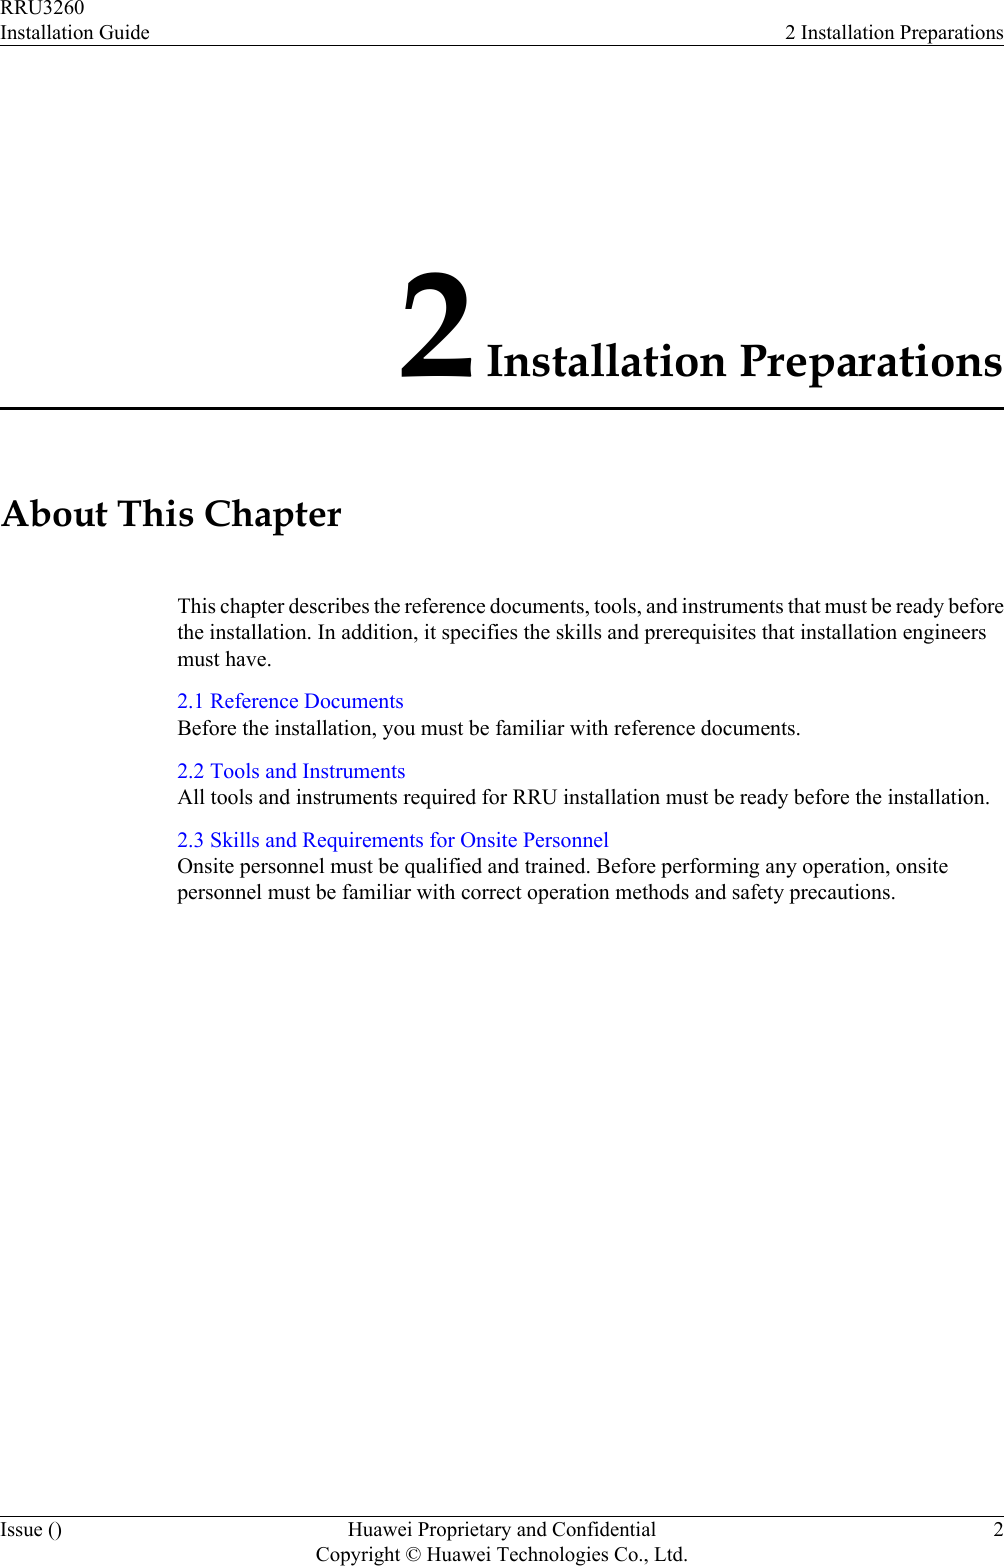 2 Installation PreparationsAbout This ChapterThis chapter describes the reference documents, tools, and instruments that must be ready beforethe installation. In addition, it specifies the skills and prerequisites that installation engineersmust have.2.1 Reference DocumentsBefore the installation, you must be familiar with reference documents.2.2 Tools and InstrumentsAll tools and instruments required for RRU installation must be ready before the installation.2.3 Skills and Requirements for Onsite PersonnelOnsite personnel must be qualified and trained. Before performing any operation, onsitepersonnel must be familiar with correct operation methods and safety precautions.RRU3260Installation Guide 2 Installation PreparationsIssue () Huawei Proprietary and ConfidentialCopyright © Huawei Technologies Co., Ltd.2